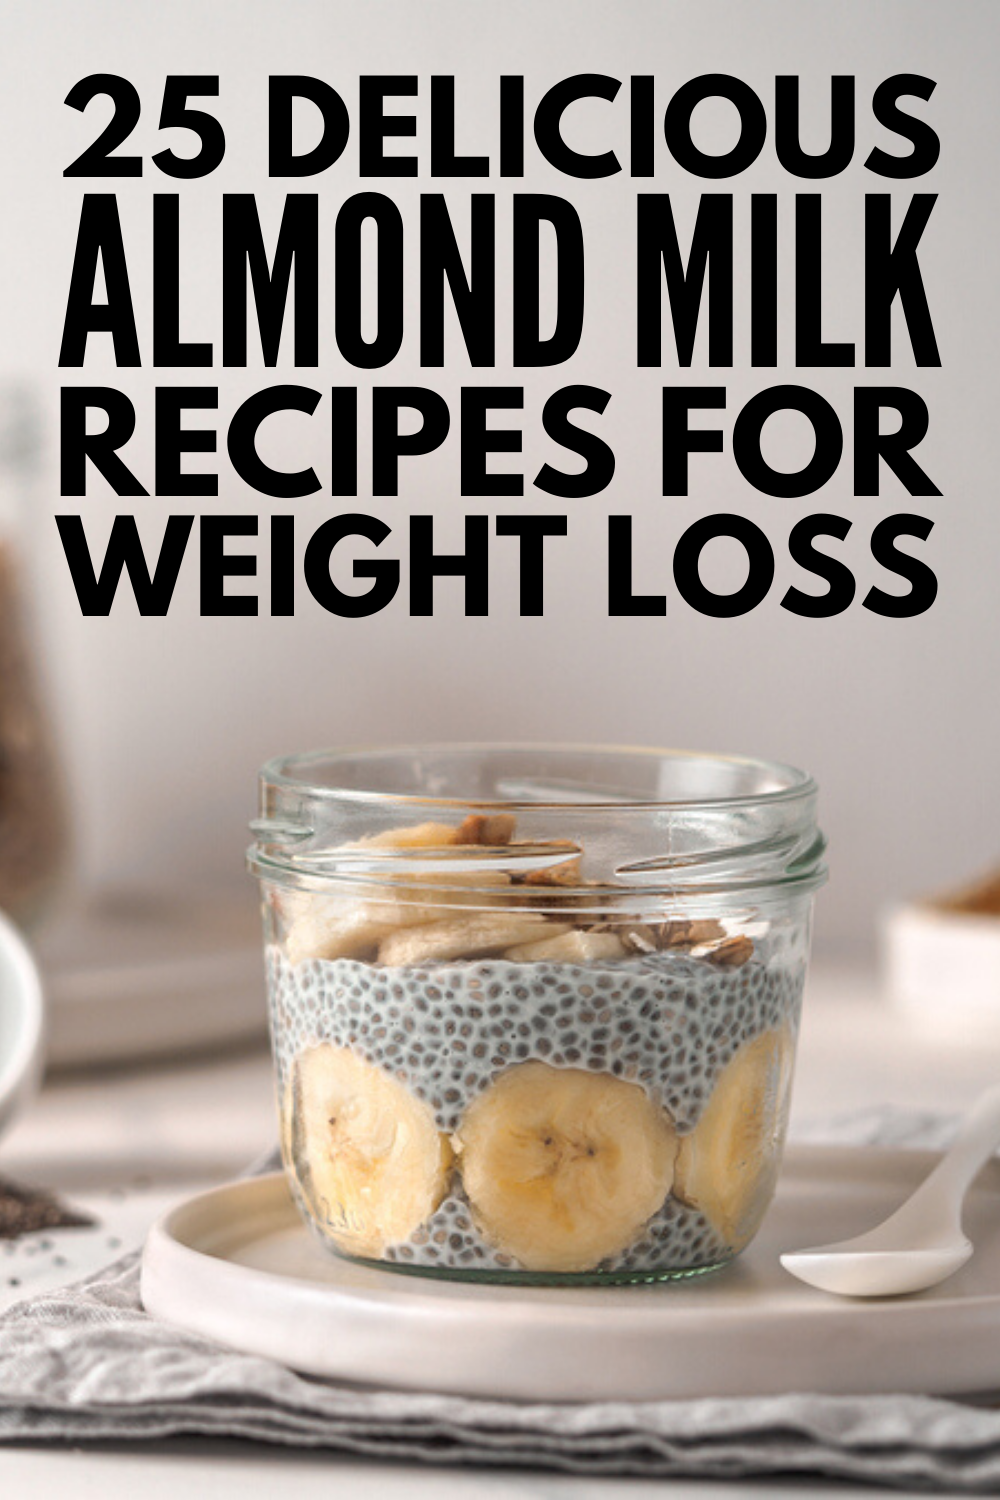 25 Healthy and Delicious Almond Milk Recipes For Weight Loss -   17 diet Clean Eating almond milk ideas